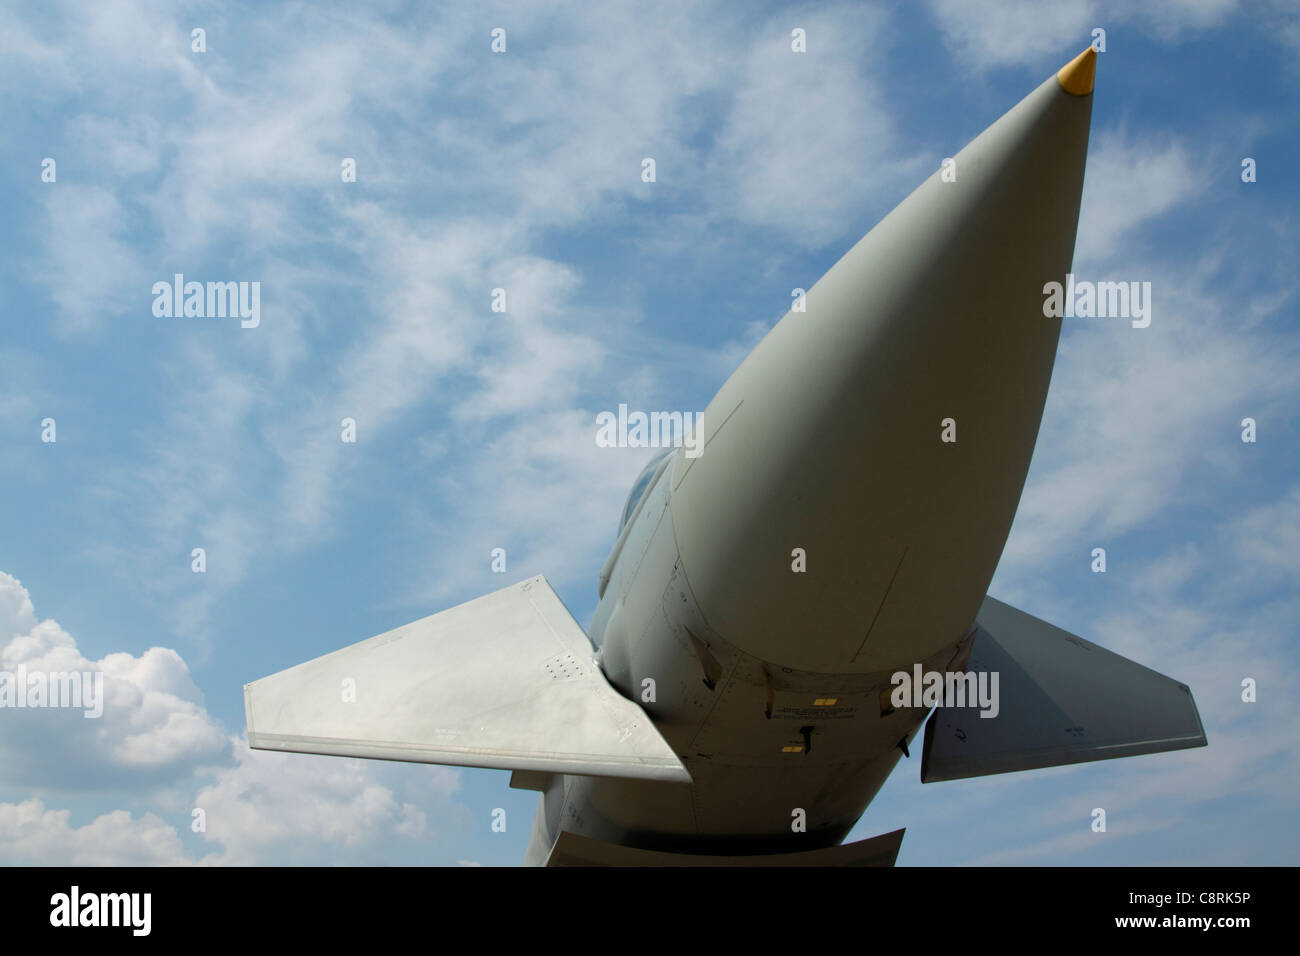 Nose and canards of a Eurofighter Typhoon combat aircraft against blue sky Stock Photo